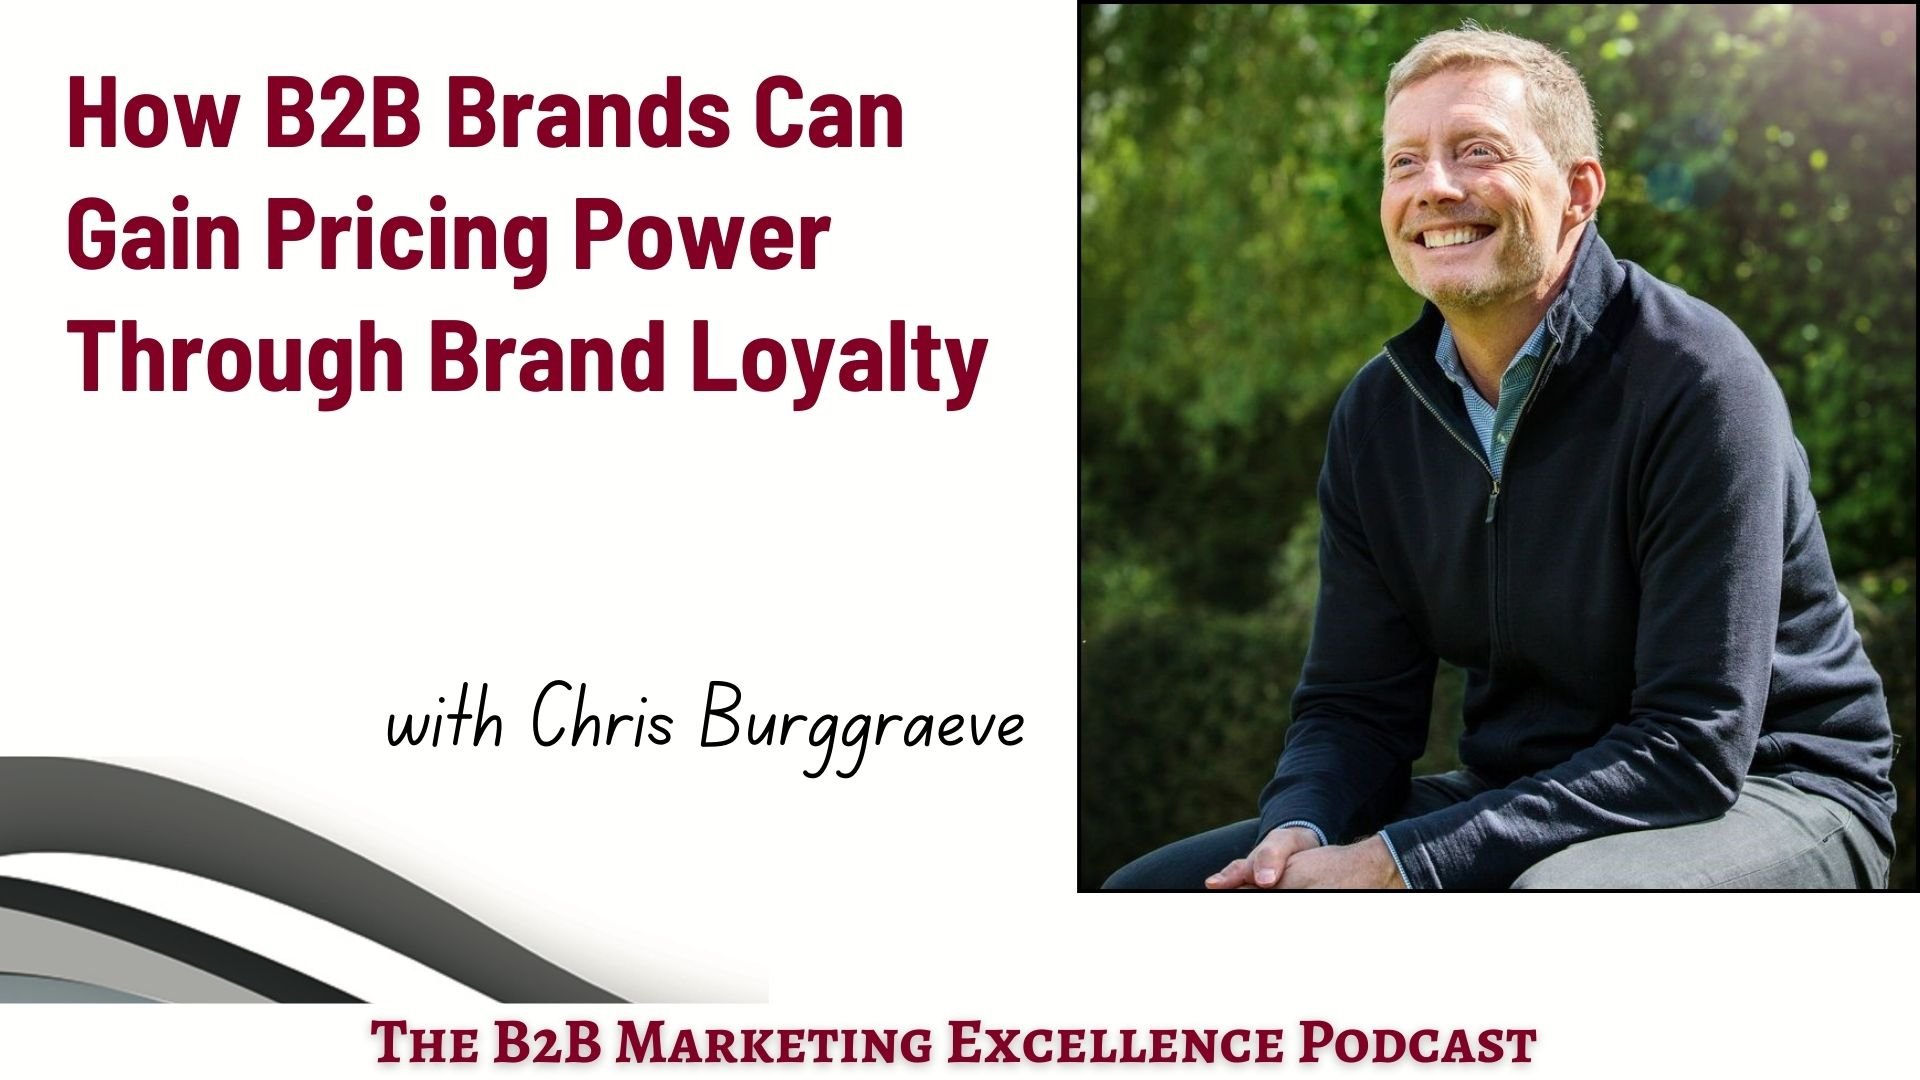 How B2B Brands Can Gain Pricing Power Through Brand Loyalty